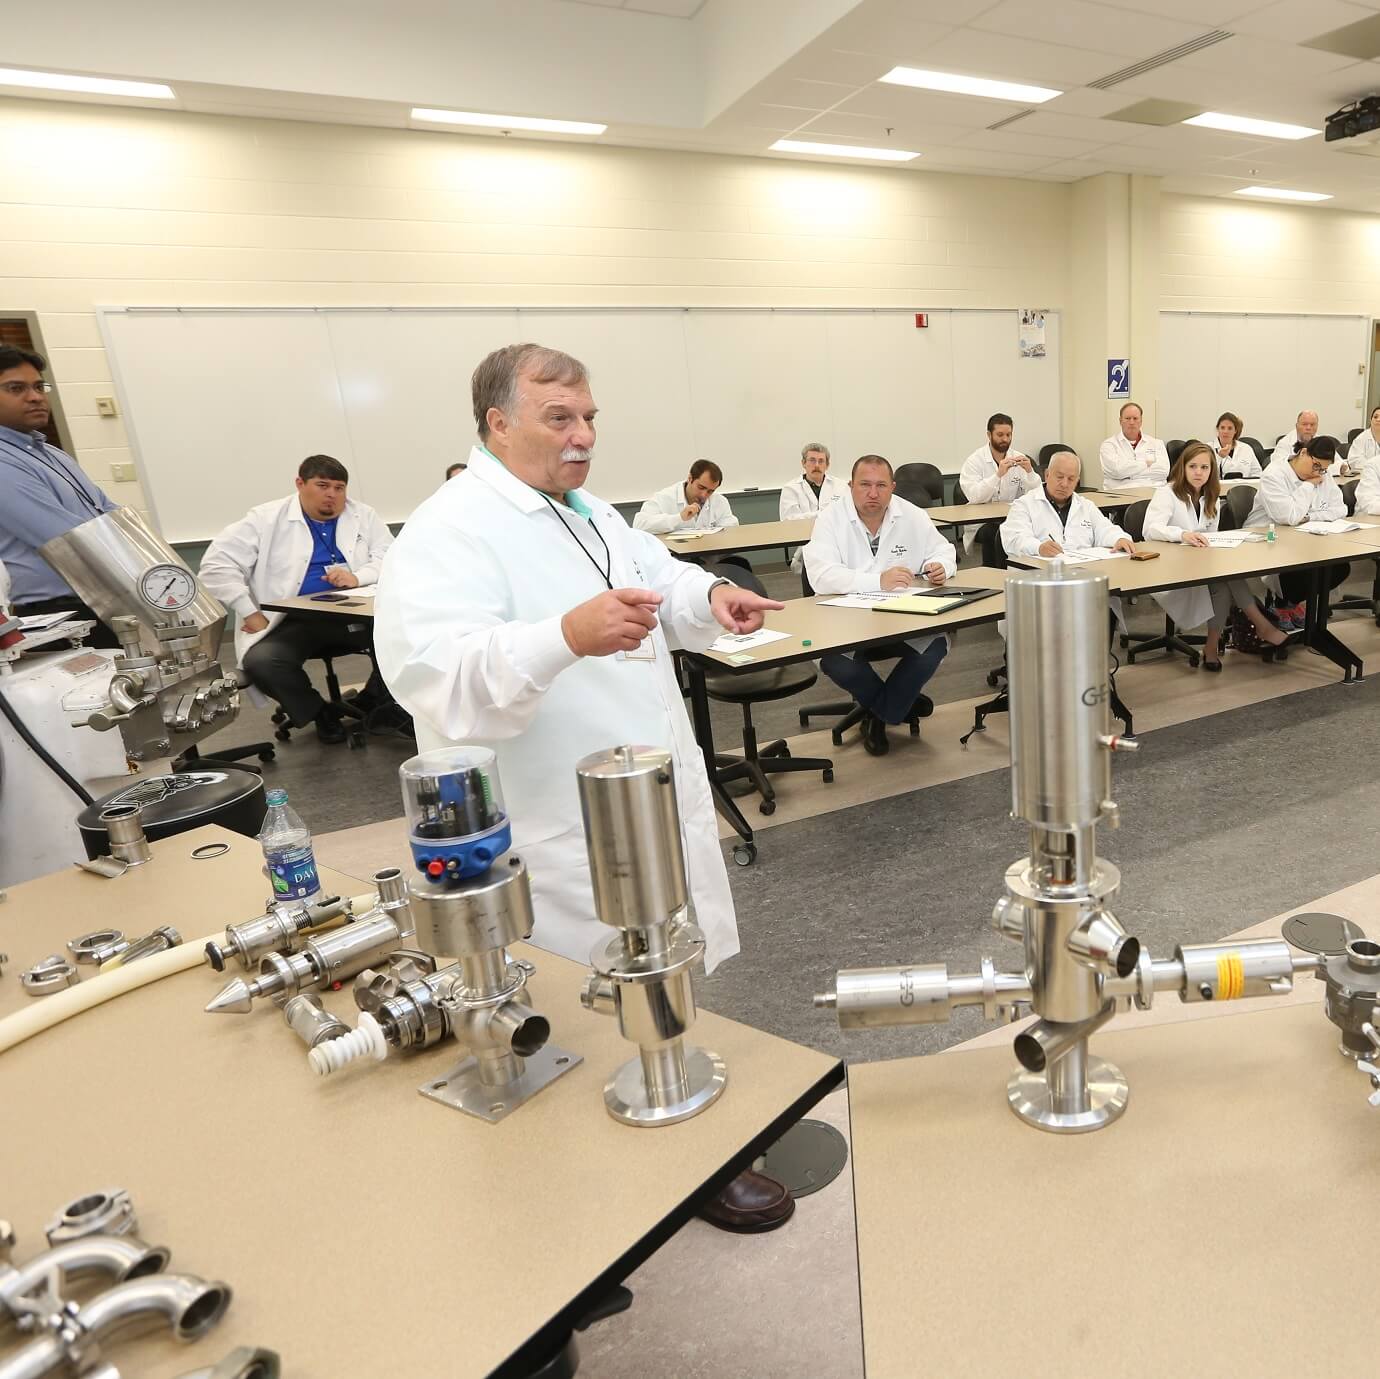 students in a classroom wearing lab coats